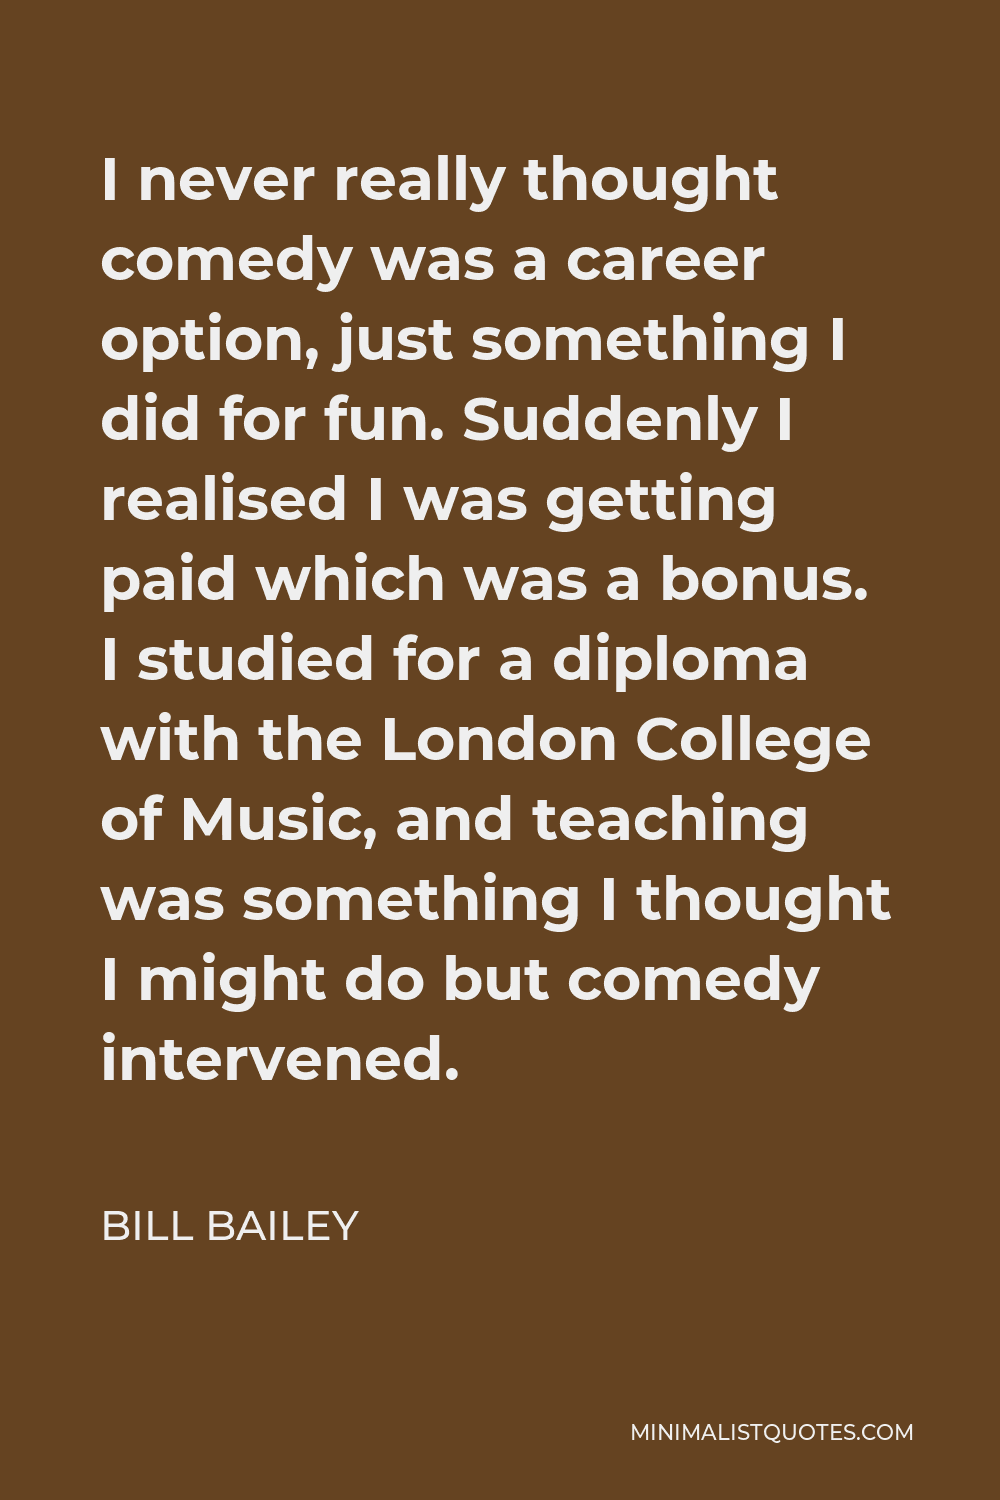 Bill Bailey Quote - I never really thought comedy was a career option, just something I did for fun. Suddenly I realised I was getting paid which was a bonus. I studied for a diploma with the London College of Music, and teaching was something I thought I might do but comedy intervened.